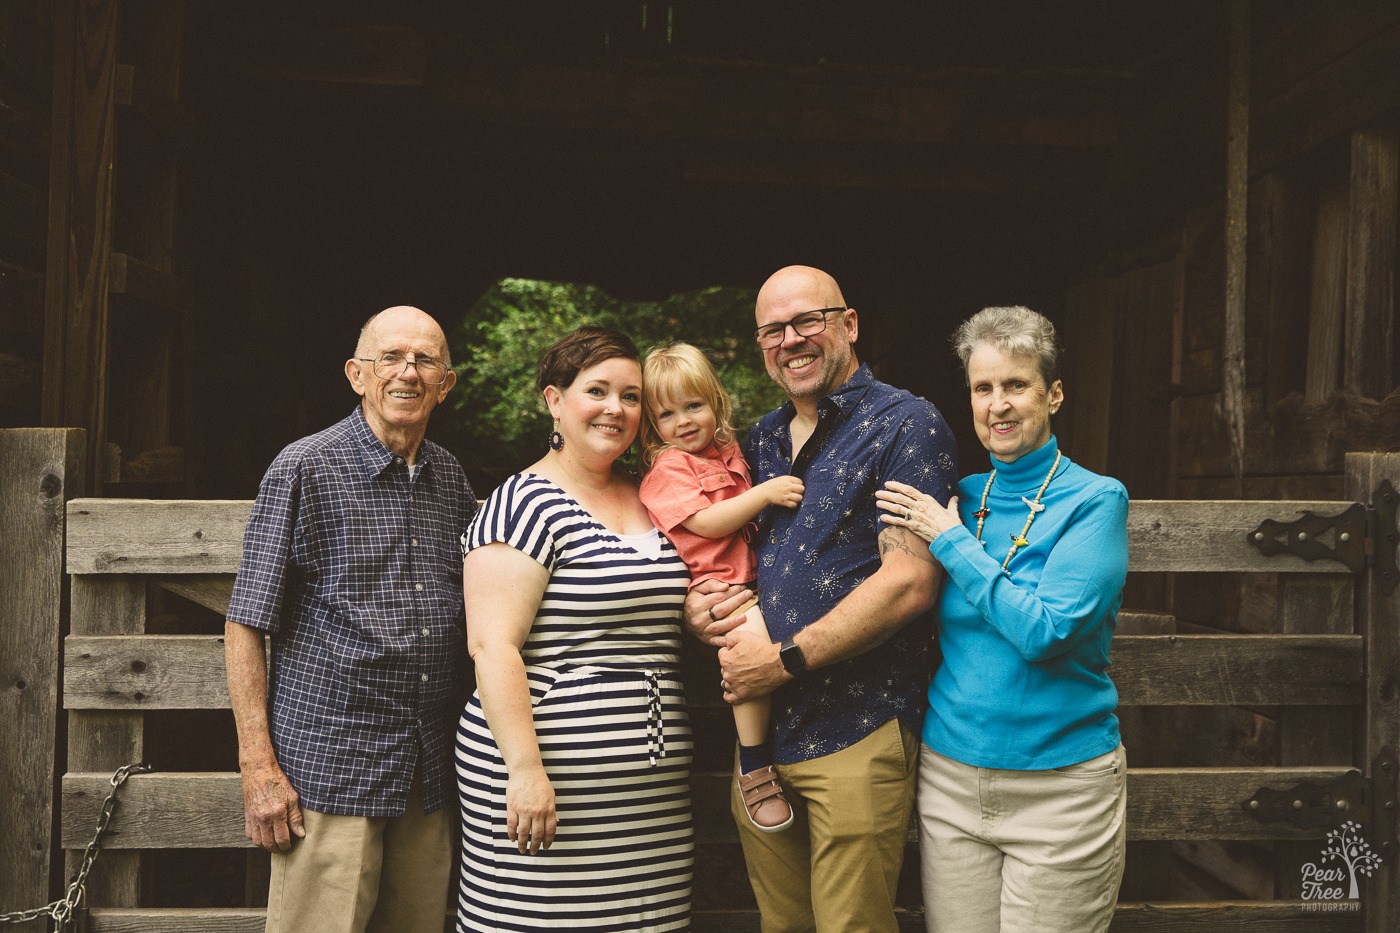 Multi-generational family photo of a toddler with his parents + grandparents in front of a barn